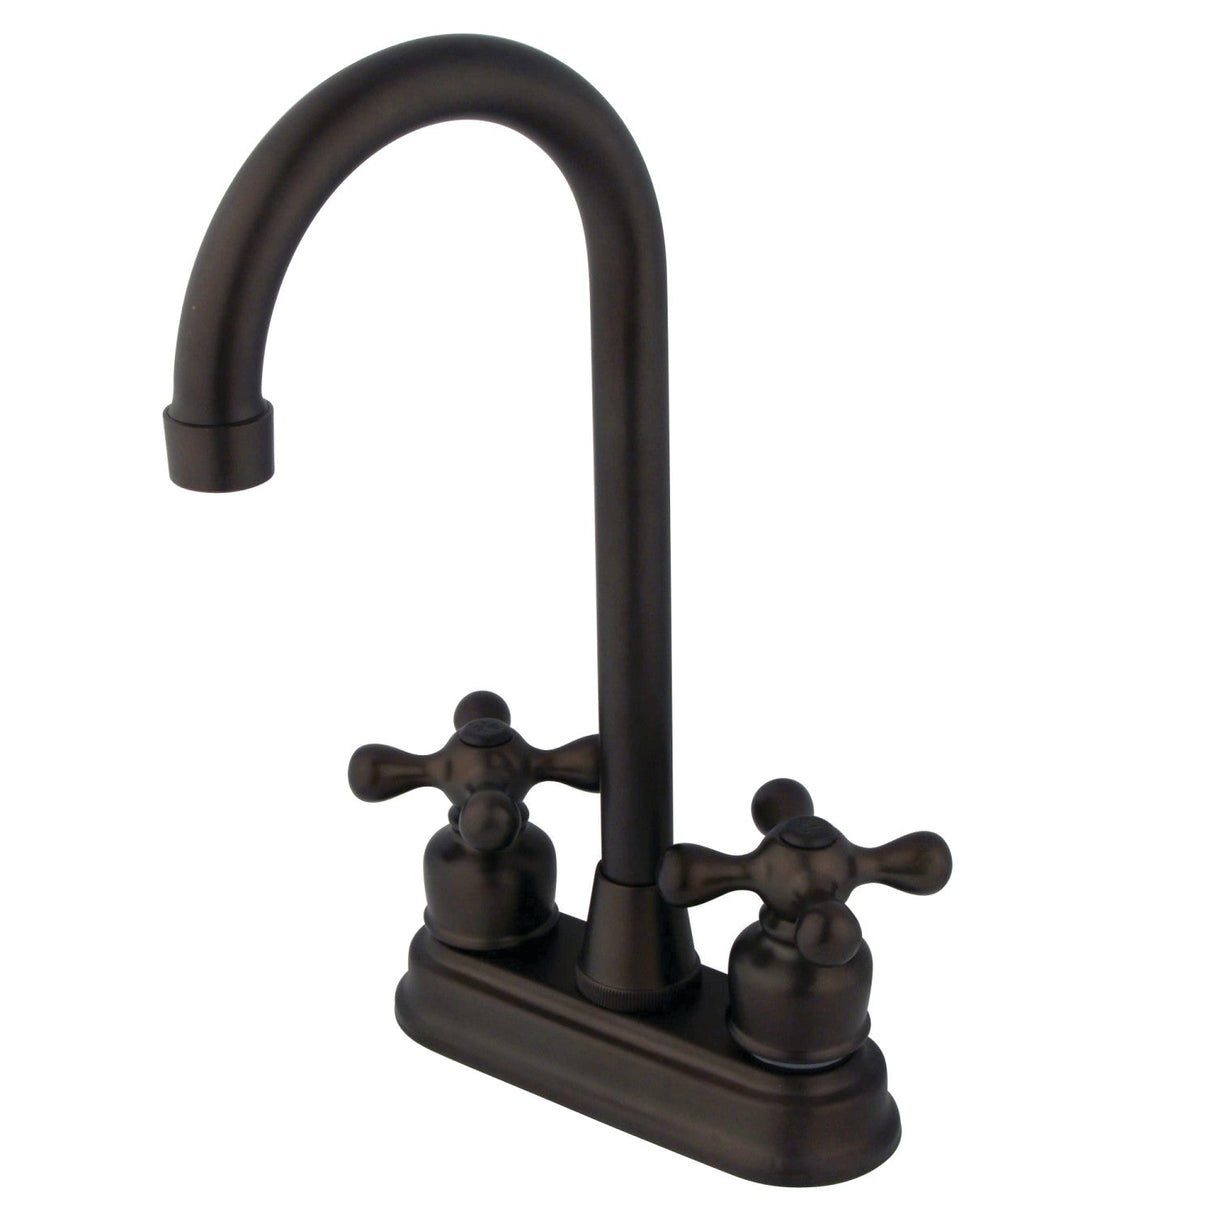 KB495AX Two-Handle 2-Hole Deck Mount Bar Faucet, Oil Rubbed Bronze